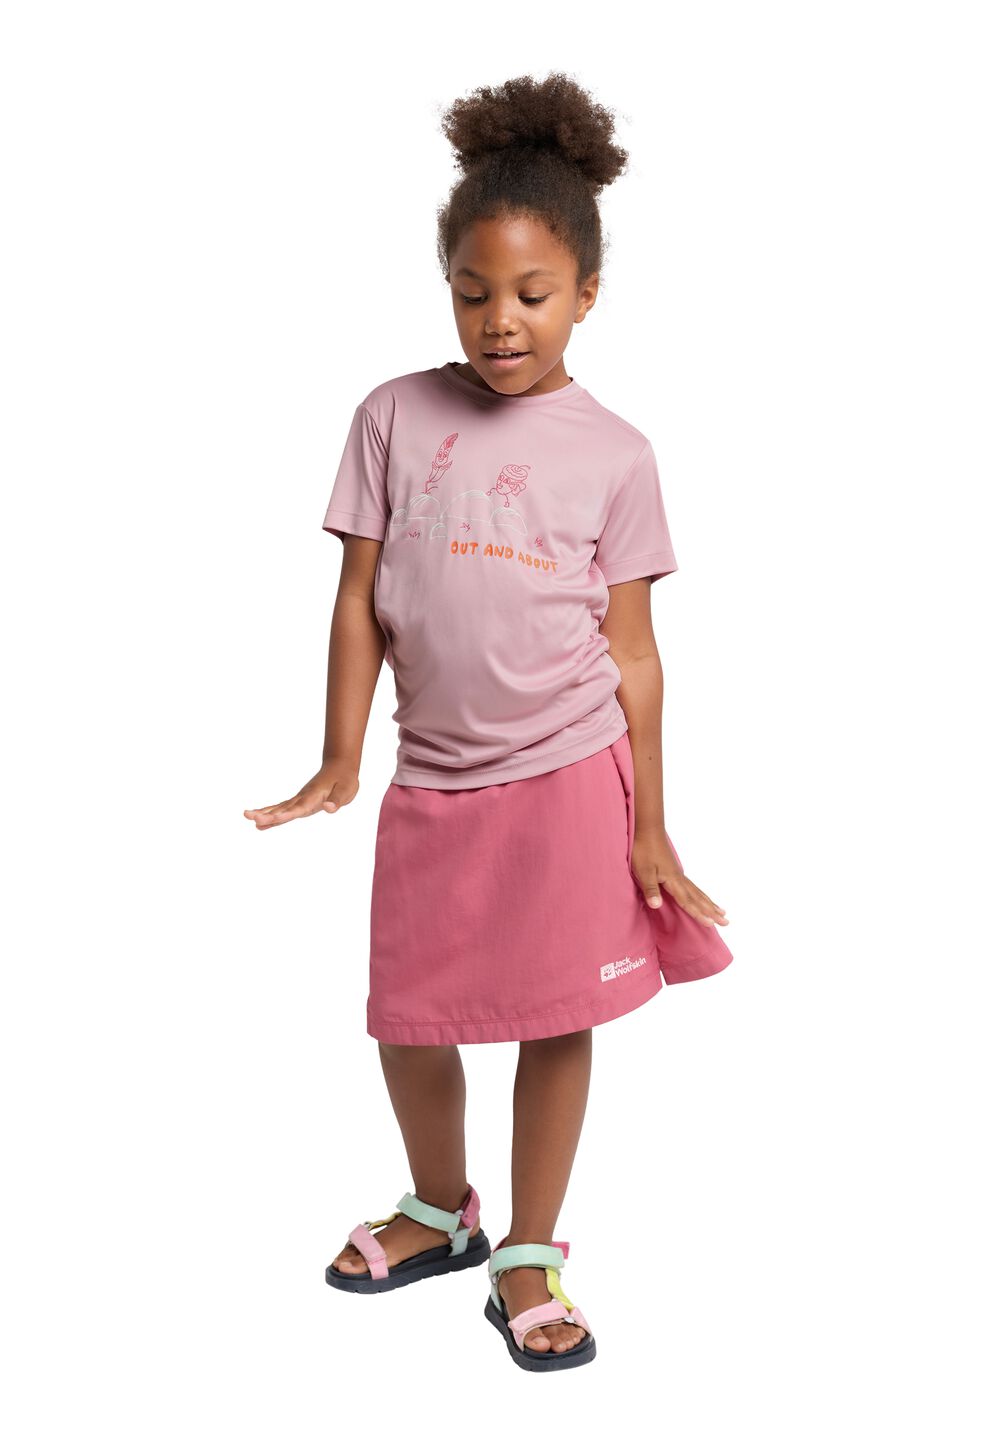 Jack Wolfskin OUT AND About T-Shirt Kids Functioneel shirt Kinderen 128 water lily water lily